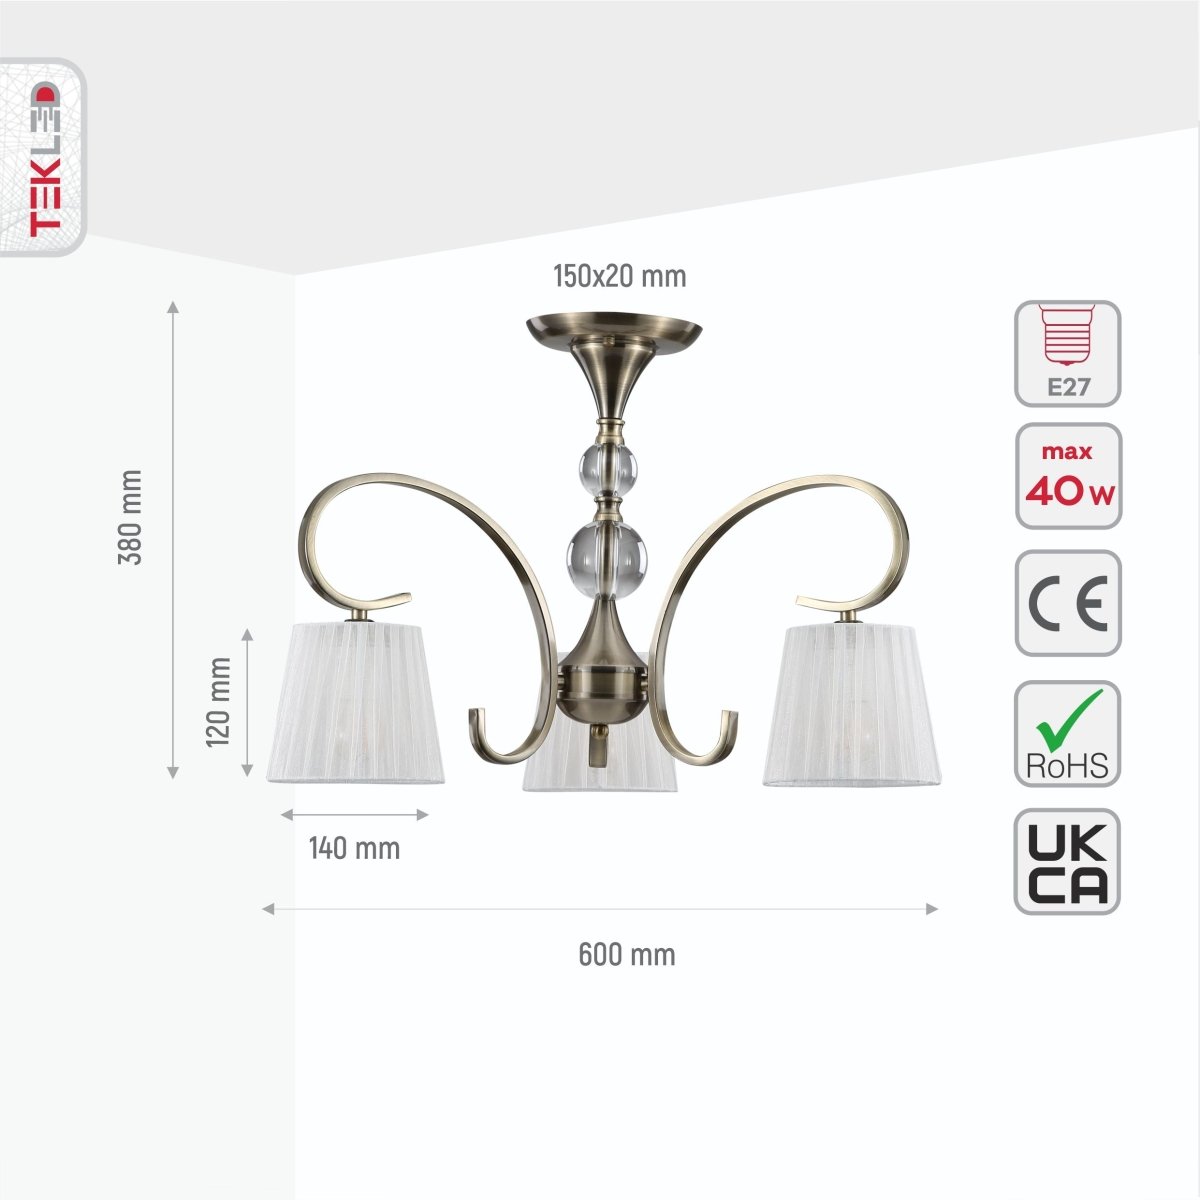 Size and specs of Antique Brass Metal Body Rice White Fabric Shade Vintage Traditional Retro Semi Flush Ceiling Light with 3xE27 Fitting | TEKLED 159-17818